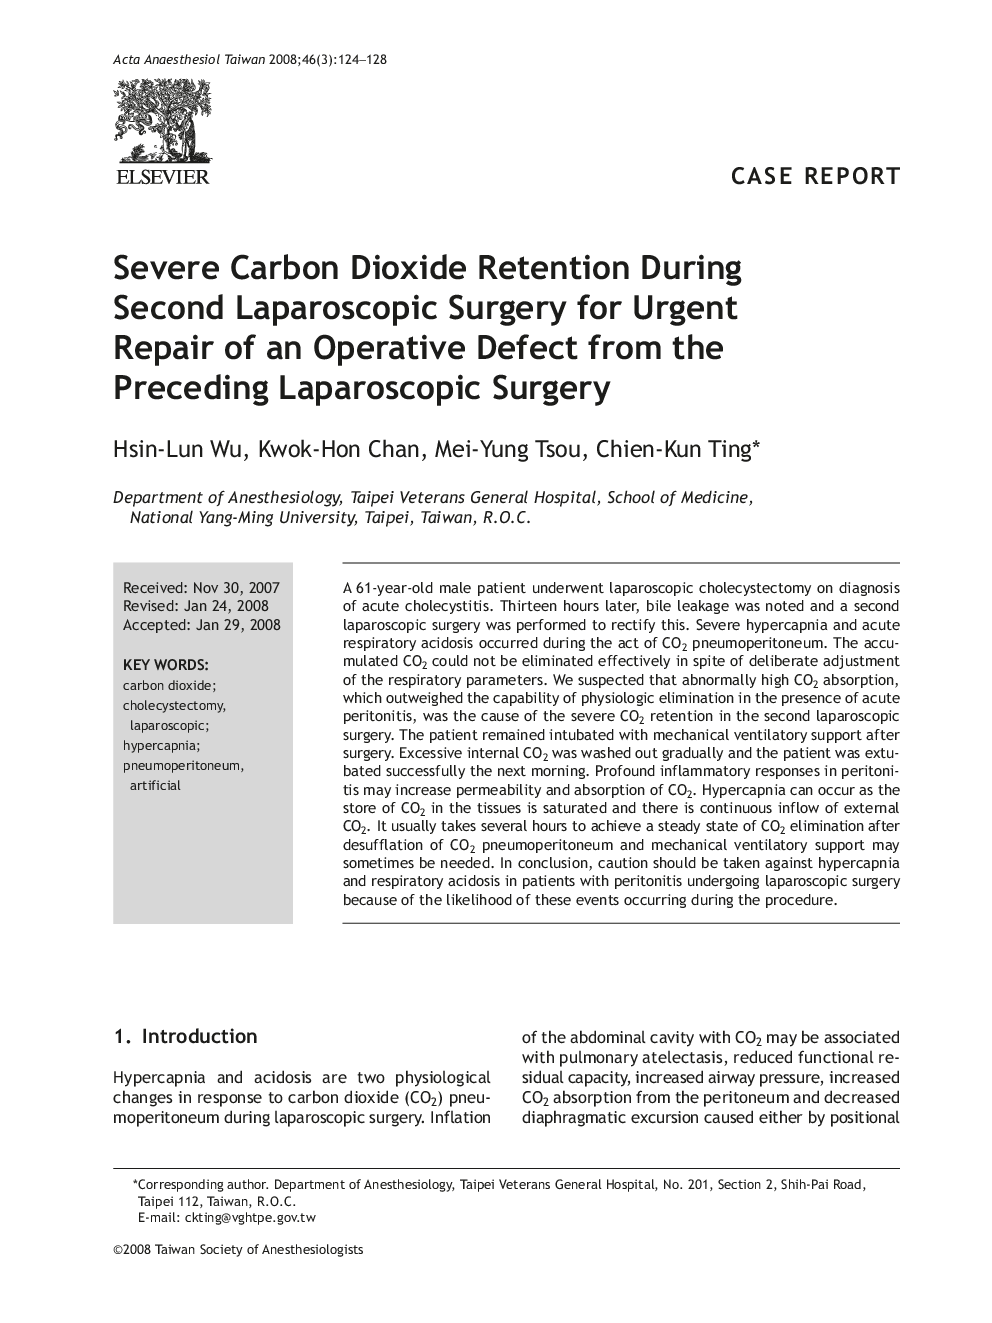 Severe Carbon Dioxide Retention During Second Laparoscopic Surgery for Urgent Repair of an Operative Defect from the Preceding Laparoscopic Surgery